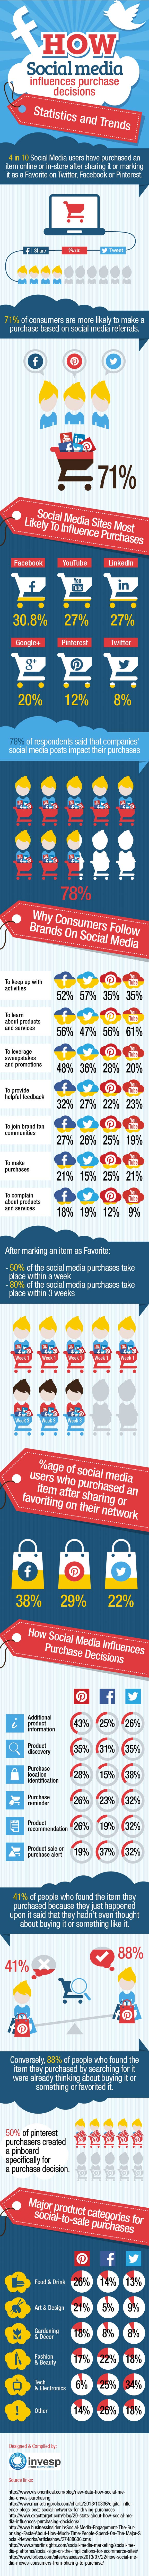 How Social Media Influences Purchase Decisions – Statistics And Trends #infographic #socialmedia